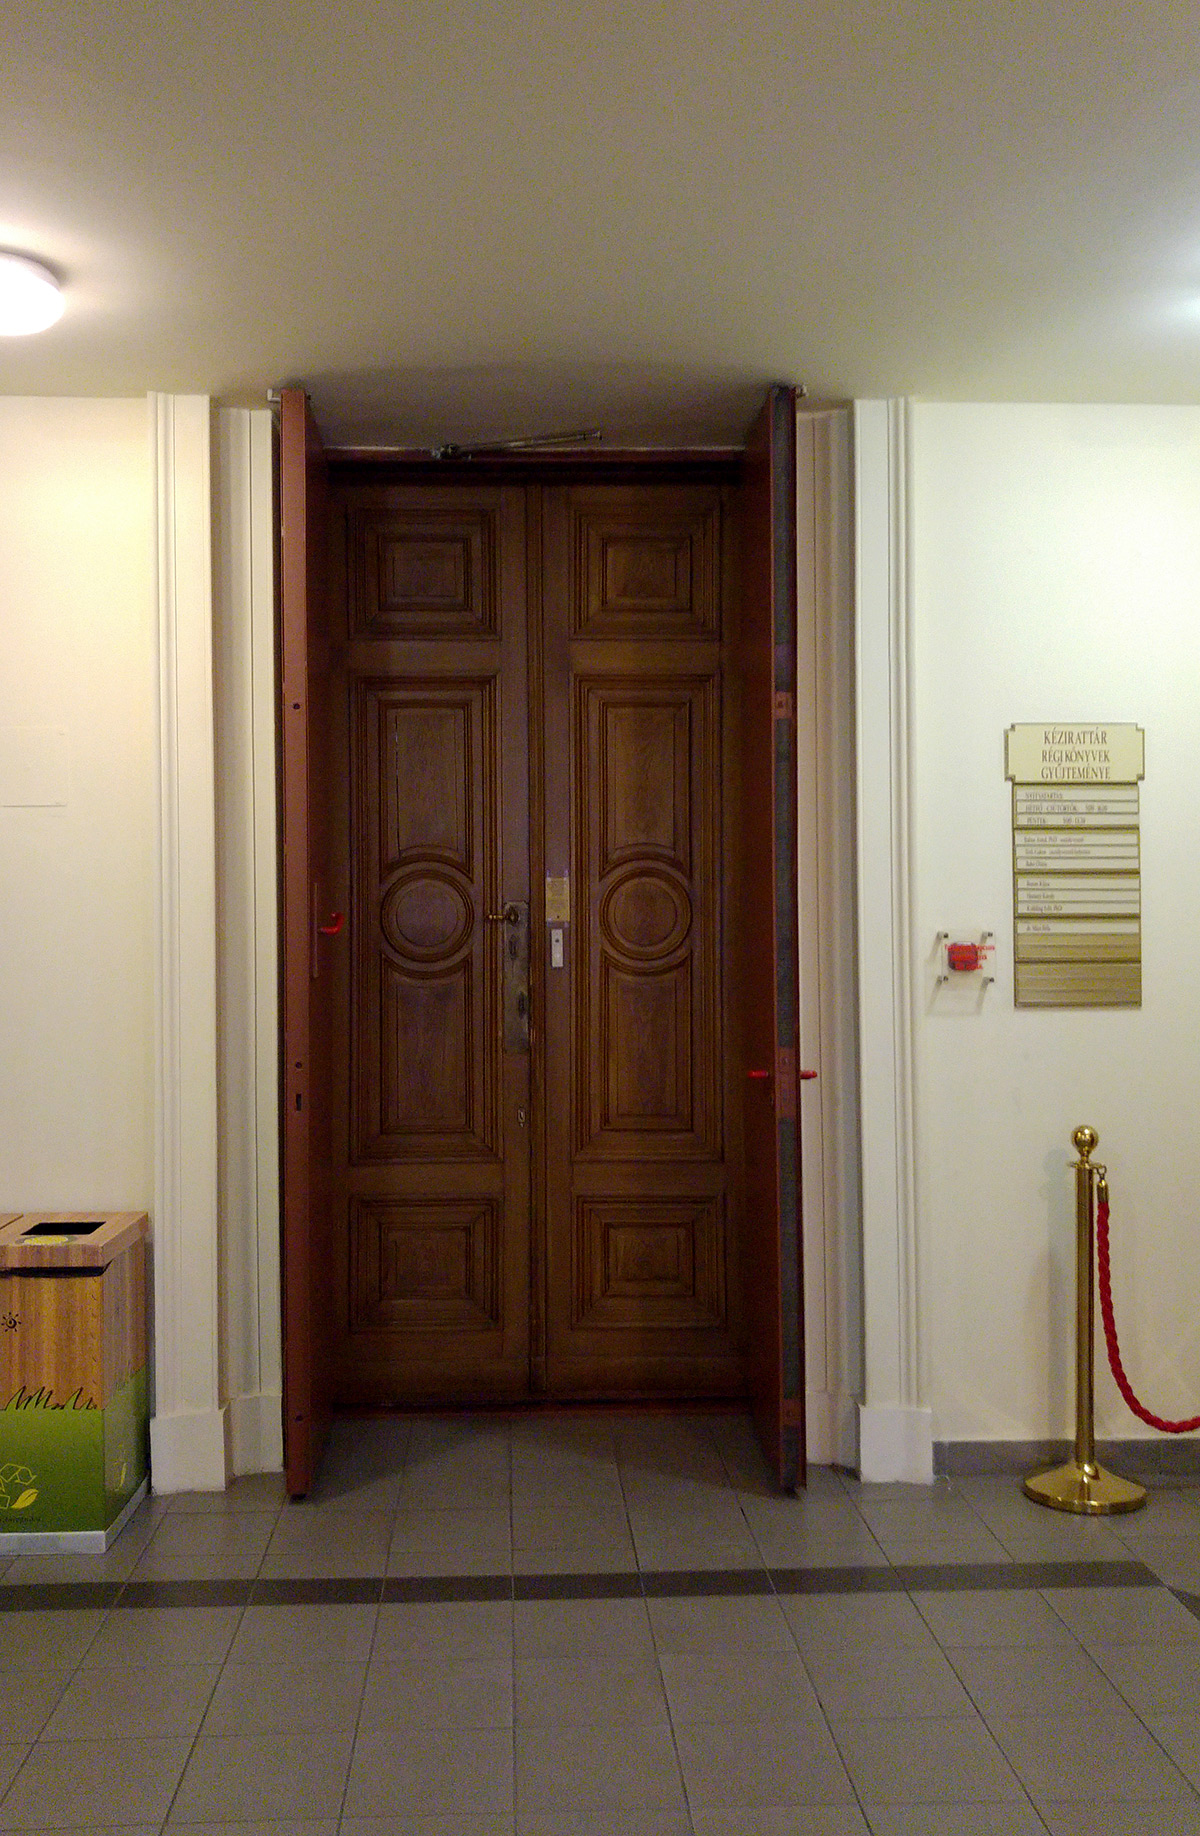 The entrance of the Department of manuscripts and rare books at the headquaters of the Hungarian Academy of Sciences, Budapest